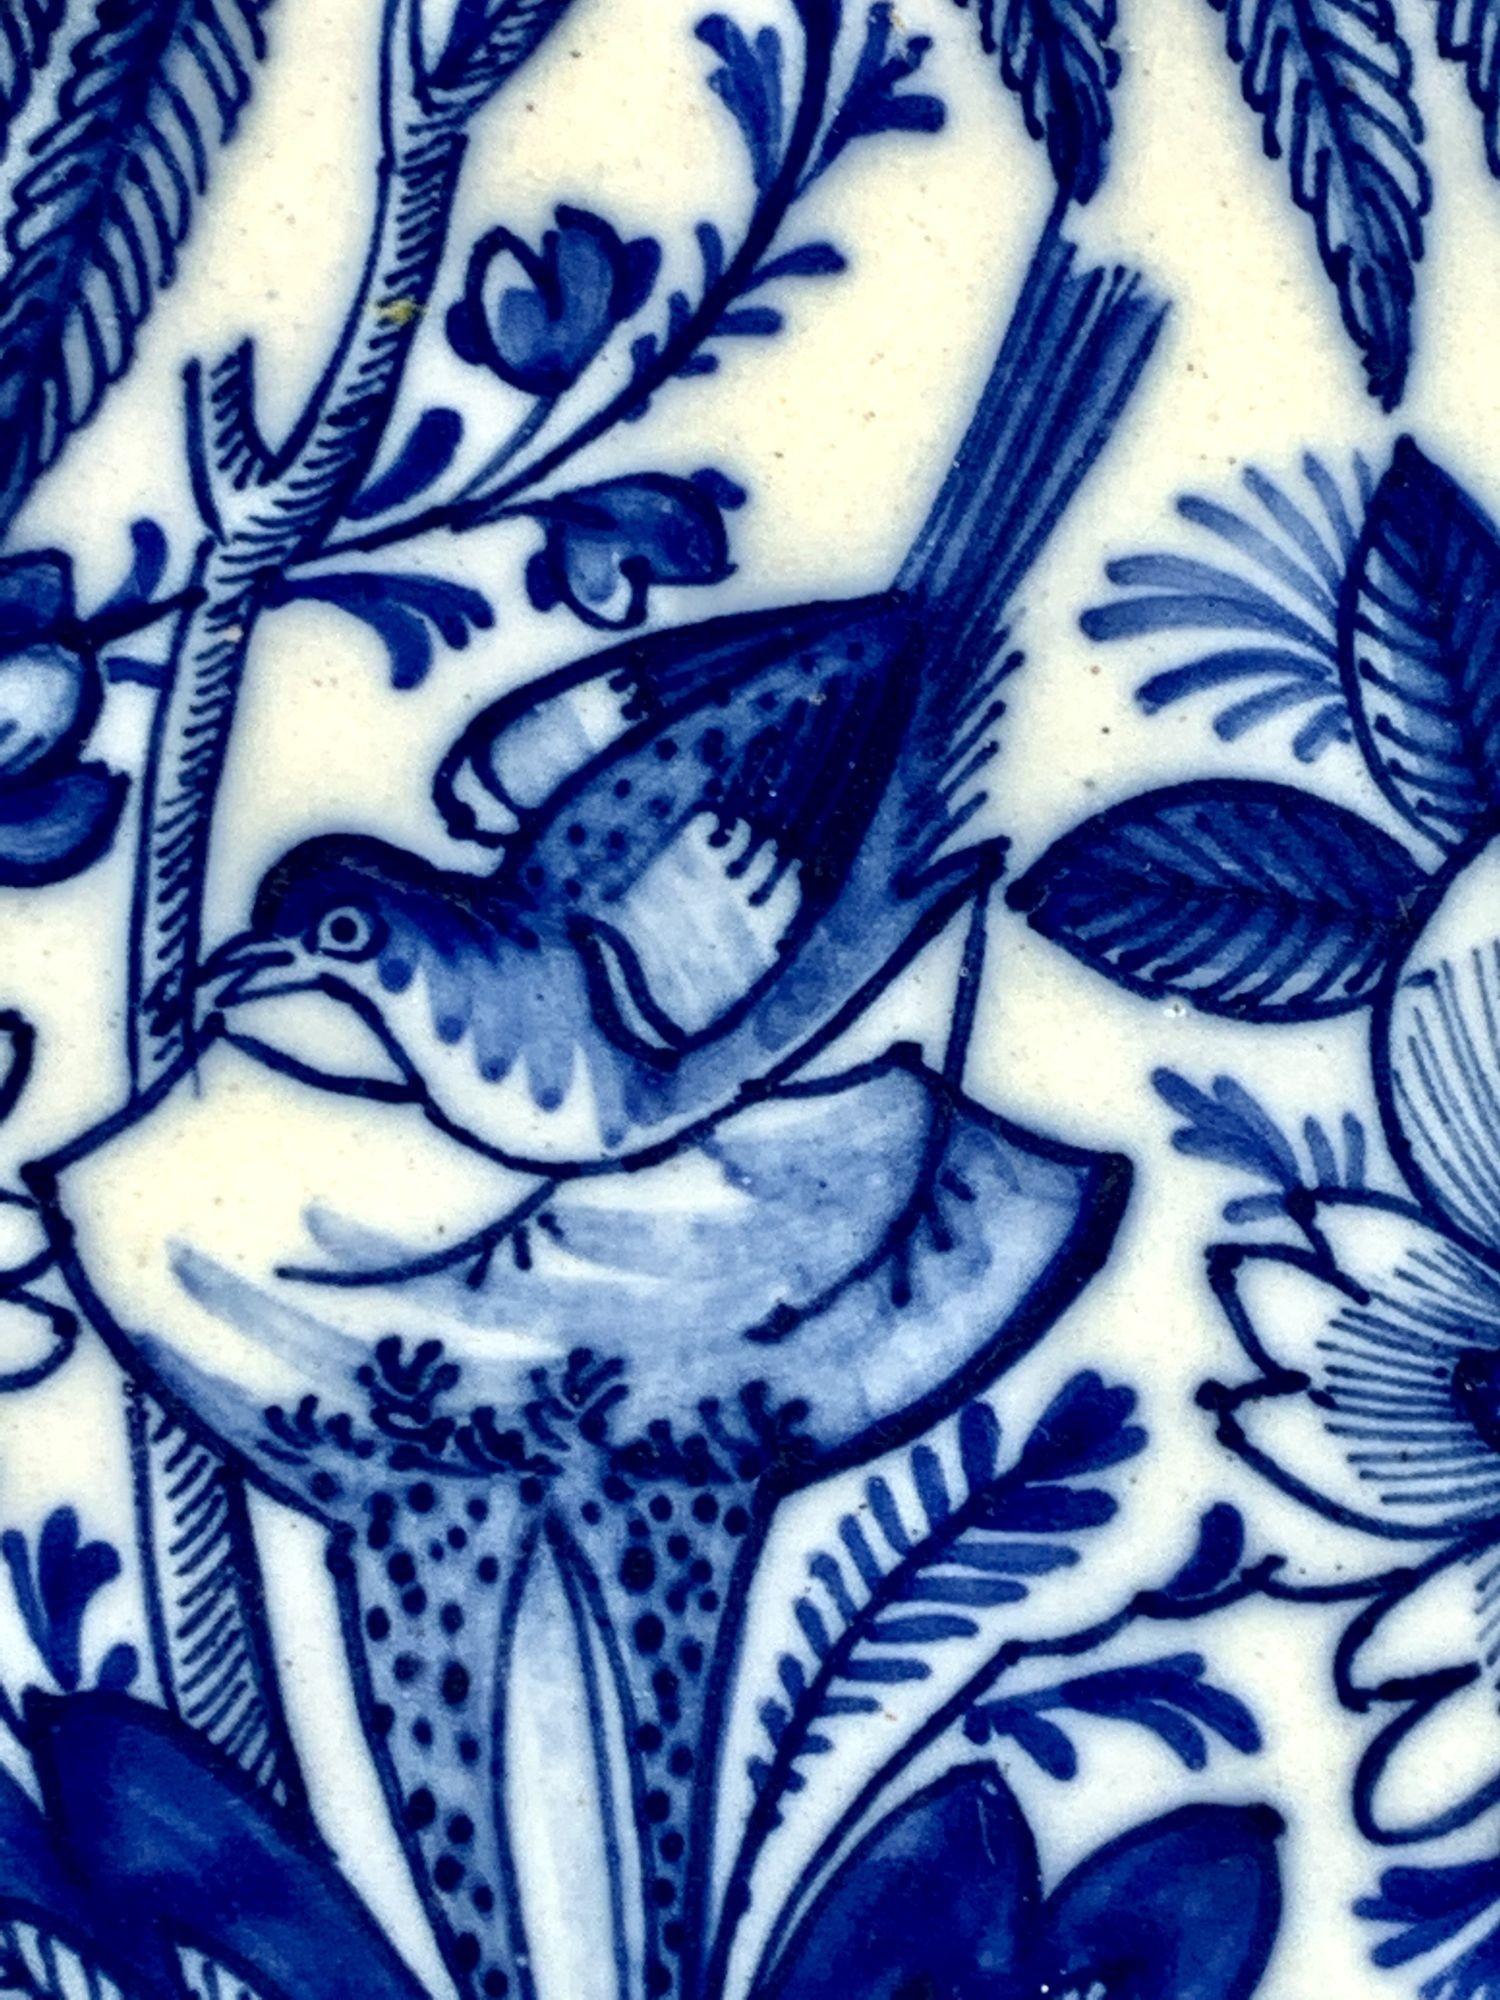 delft blauw handpainted made in holland